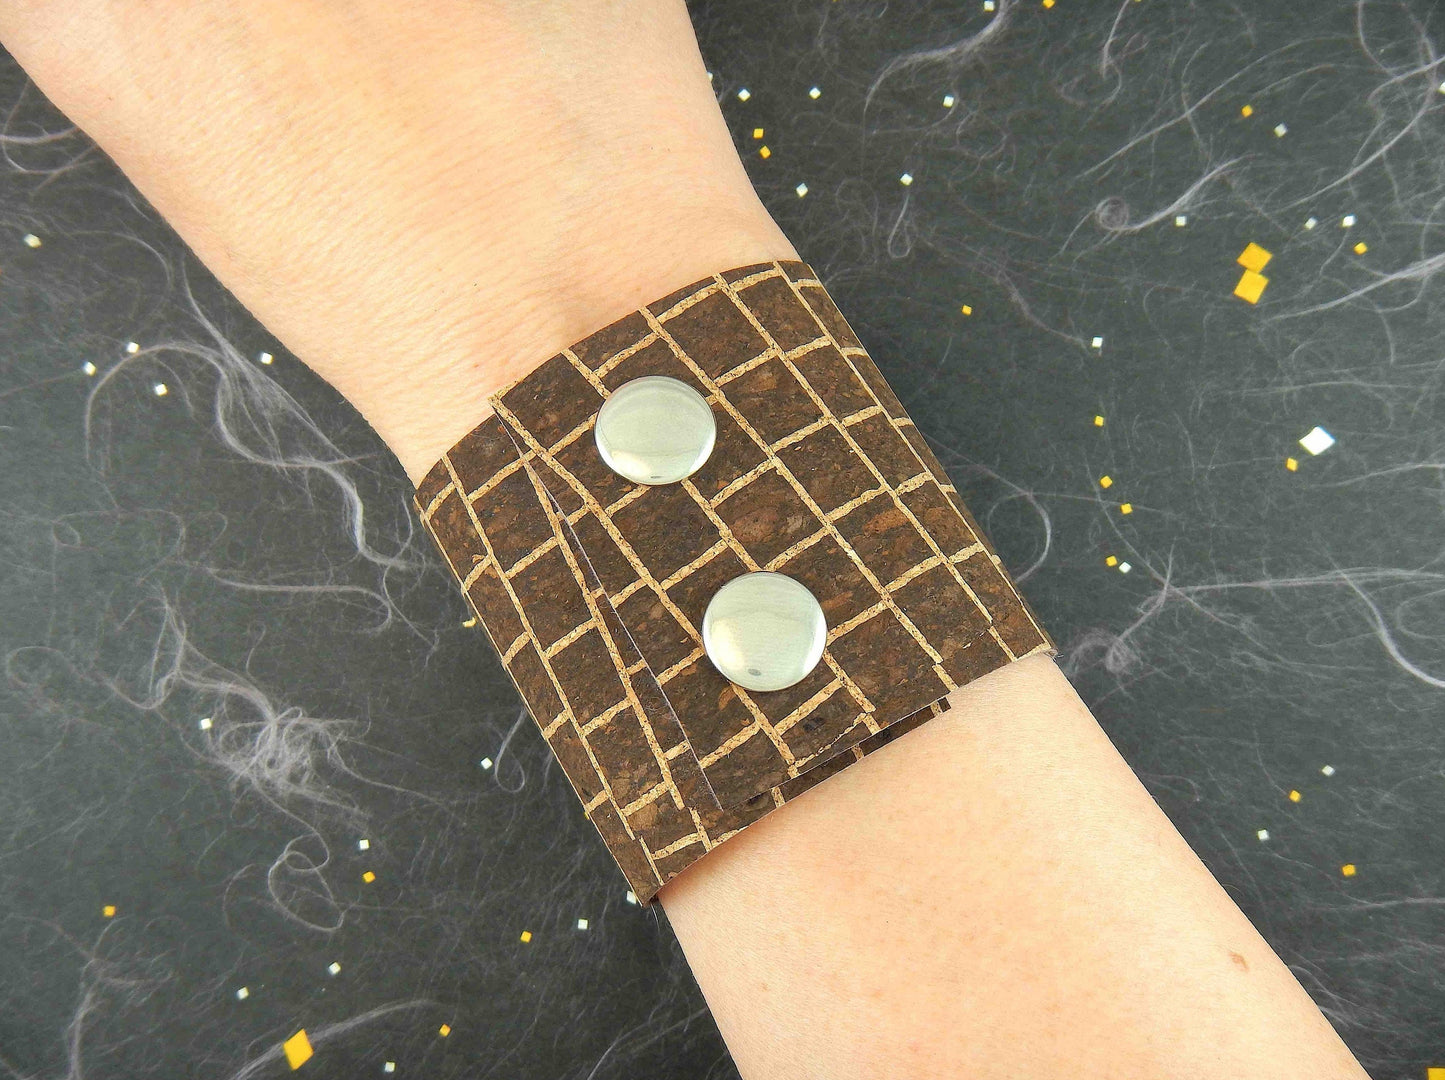 50mm flat cork cuff bracelet in 6 colours (brown tiling, brown zebra, natural, sky blue, emerald green, red and gold speckles), stainless steel snap buttons